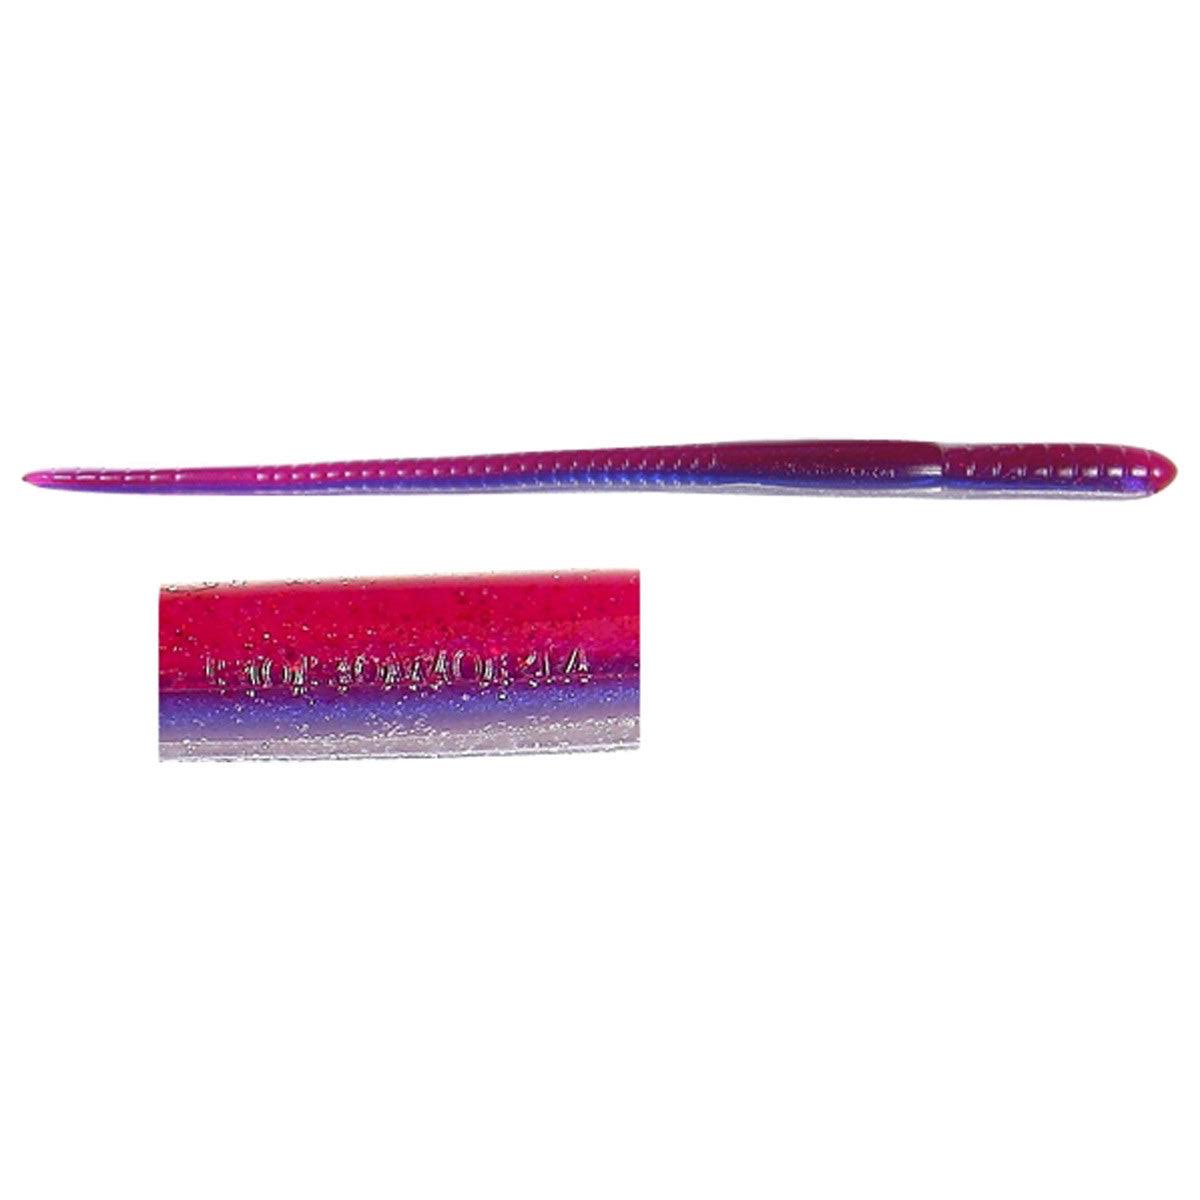 Roboworm Straight Tail Worm Bait | Accessories